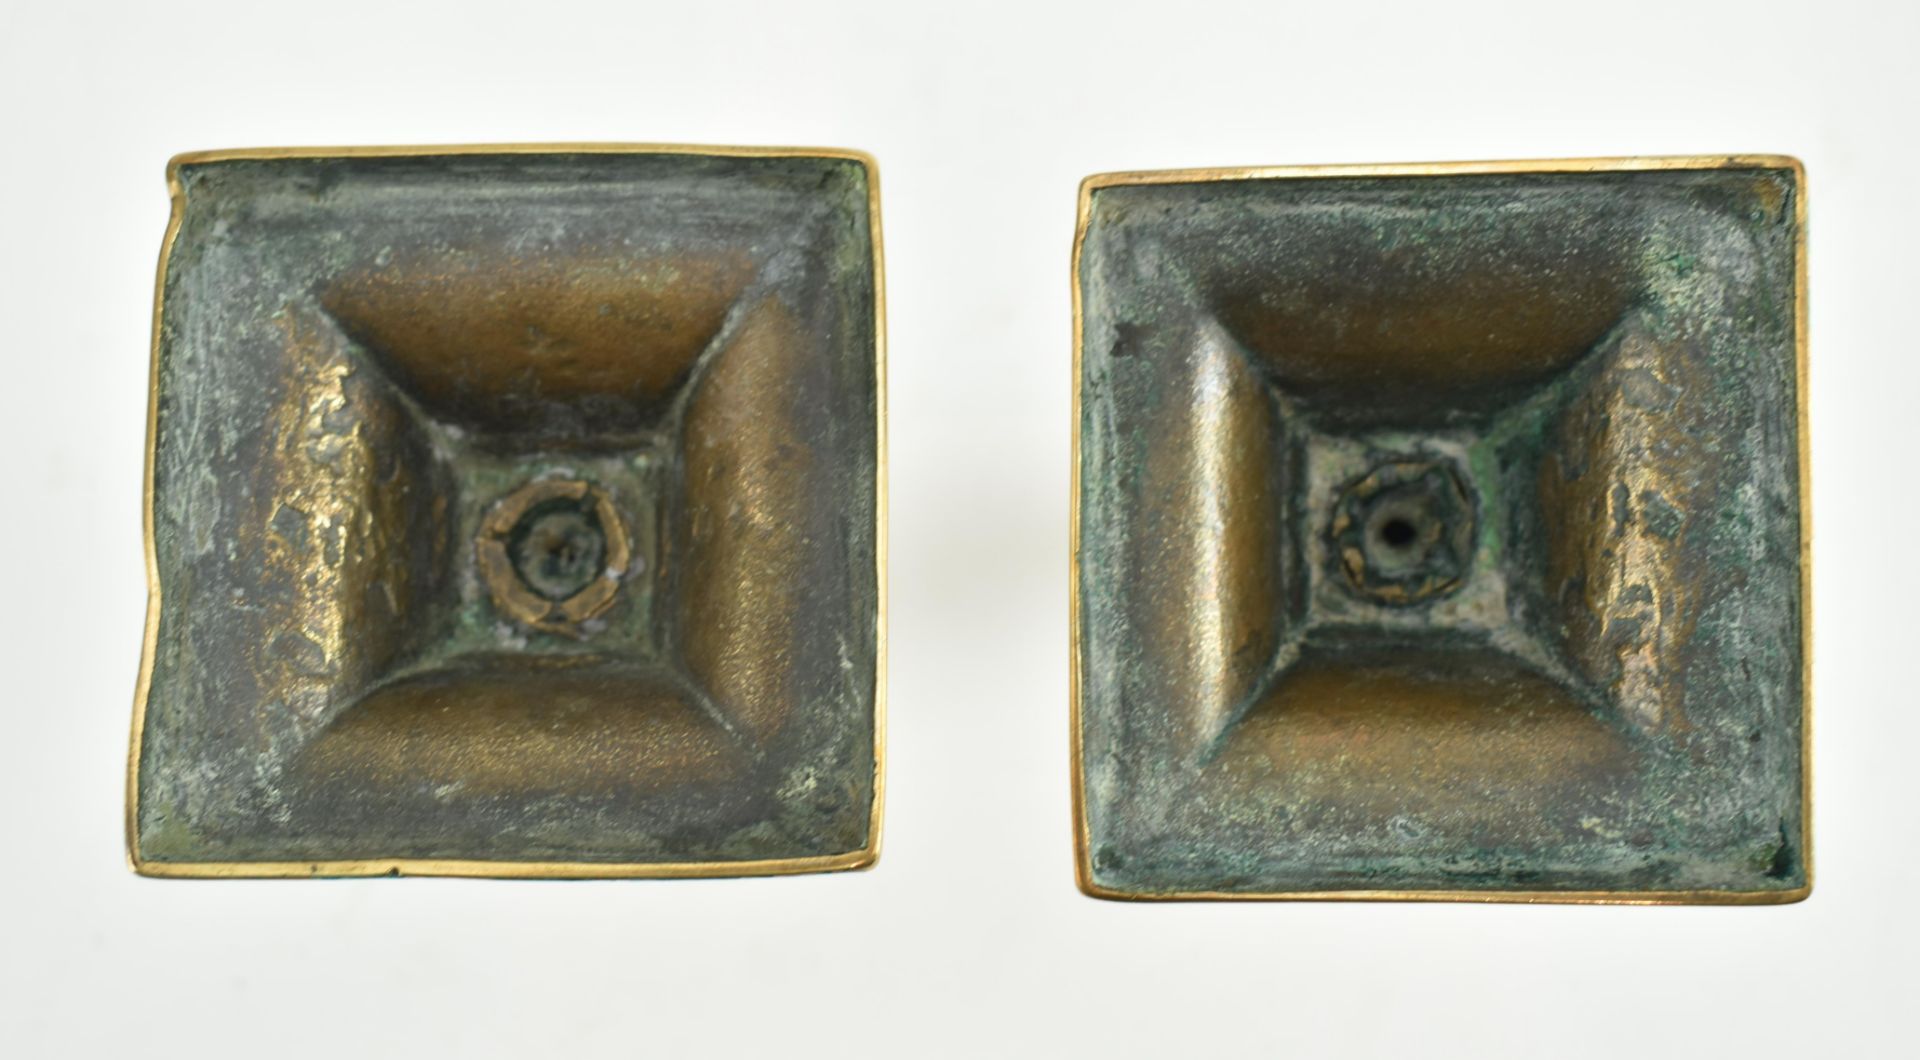 PAIR OF EARLY 19TH CENTURY GEORGIAN BRASS CANDLESTICKS - Image 5 of 5